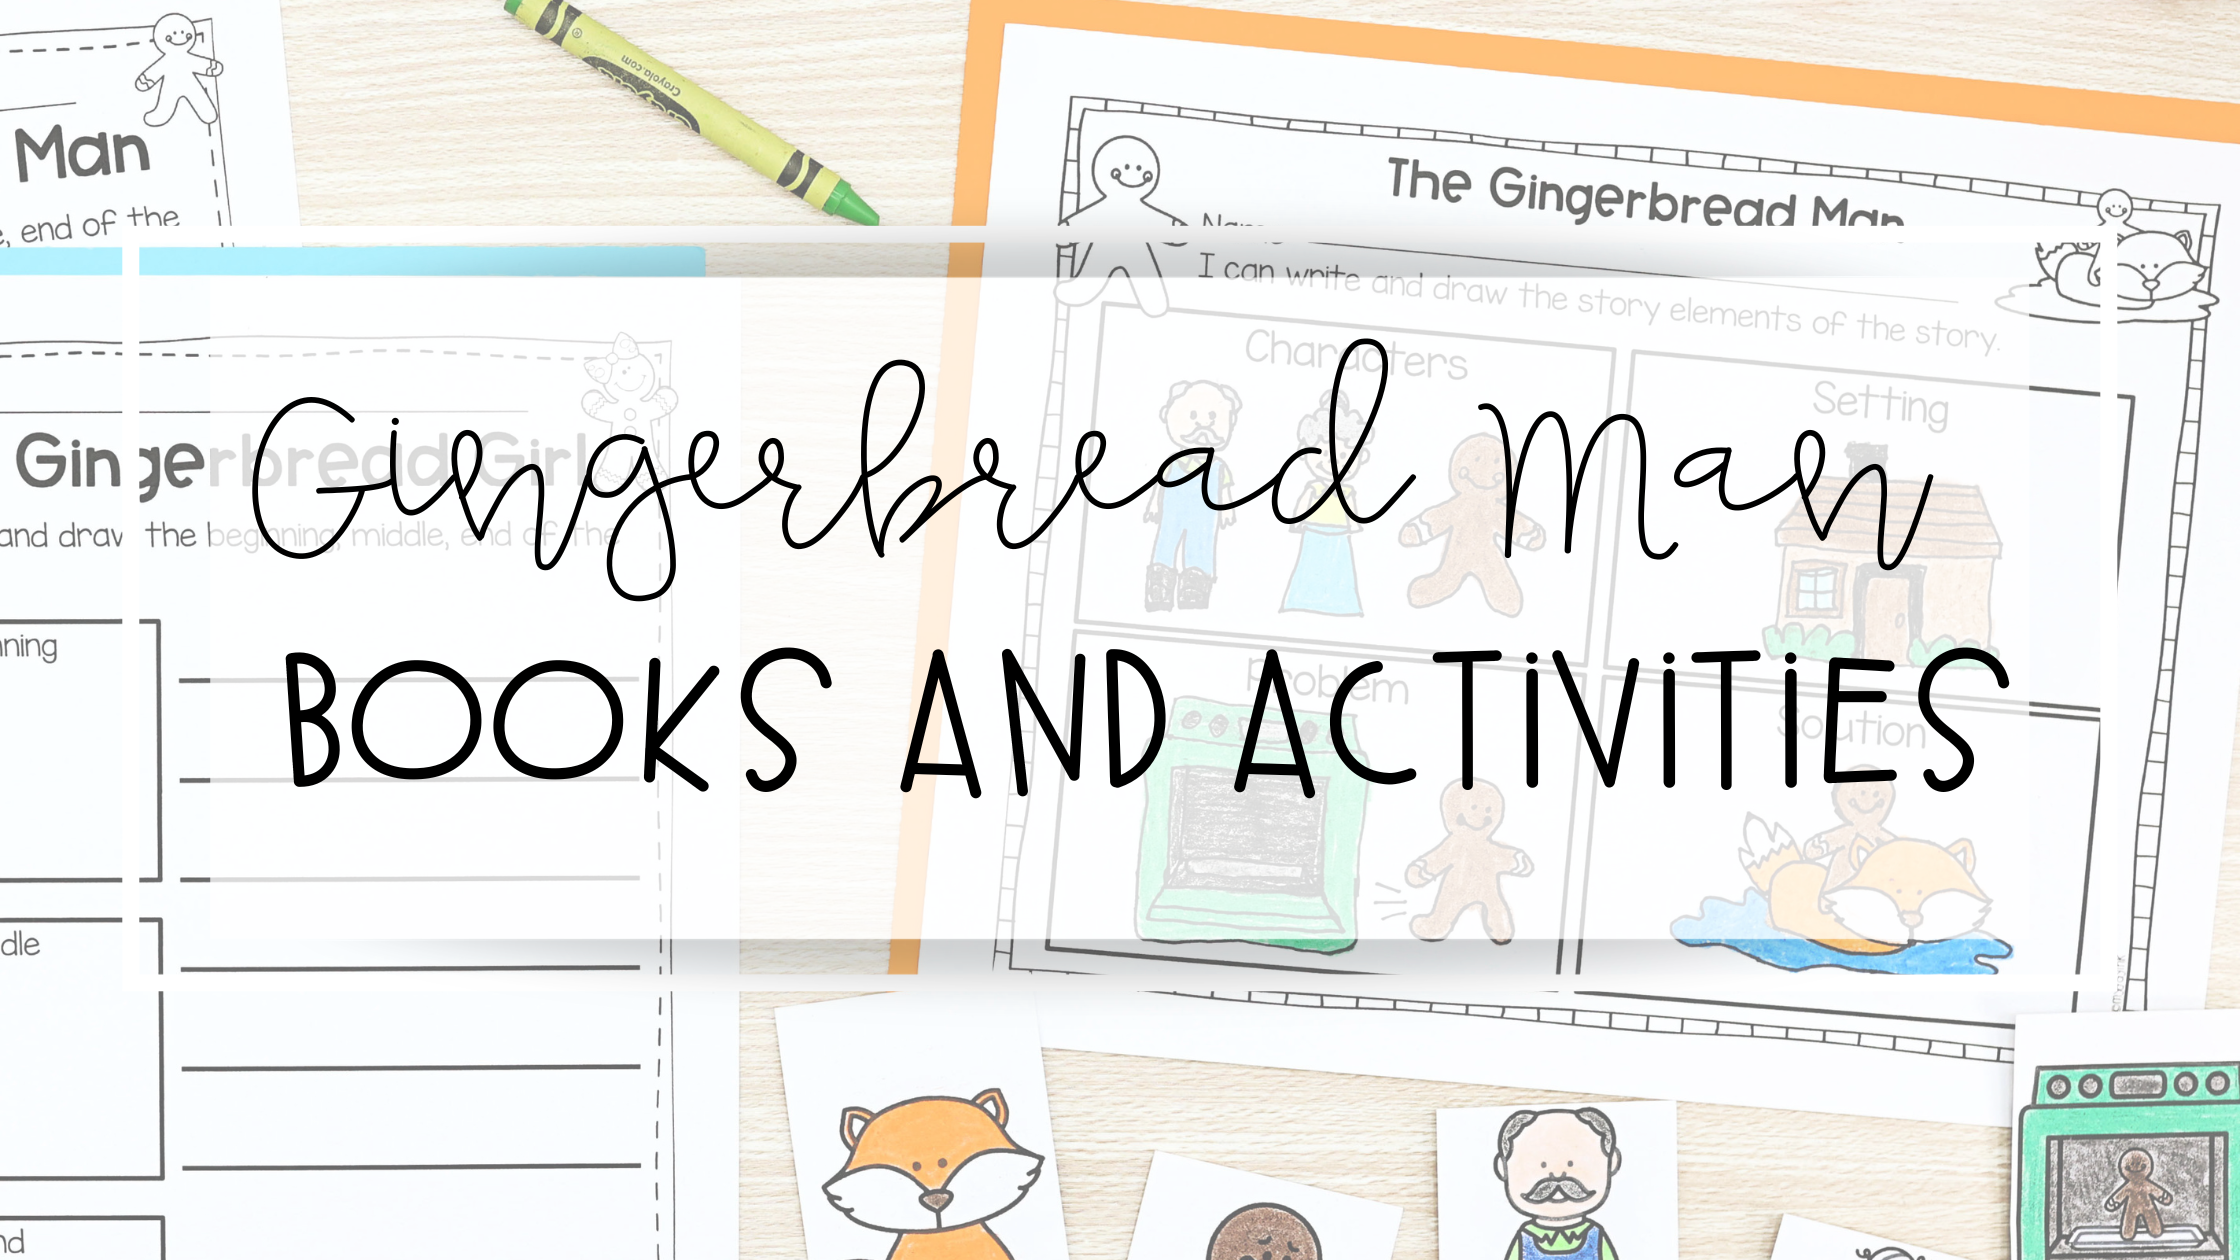 8 Gingerbread Man Books, Gingerbread Man Characters Printables, and More For The Holiday Season